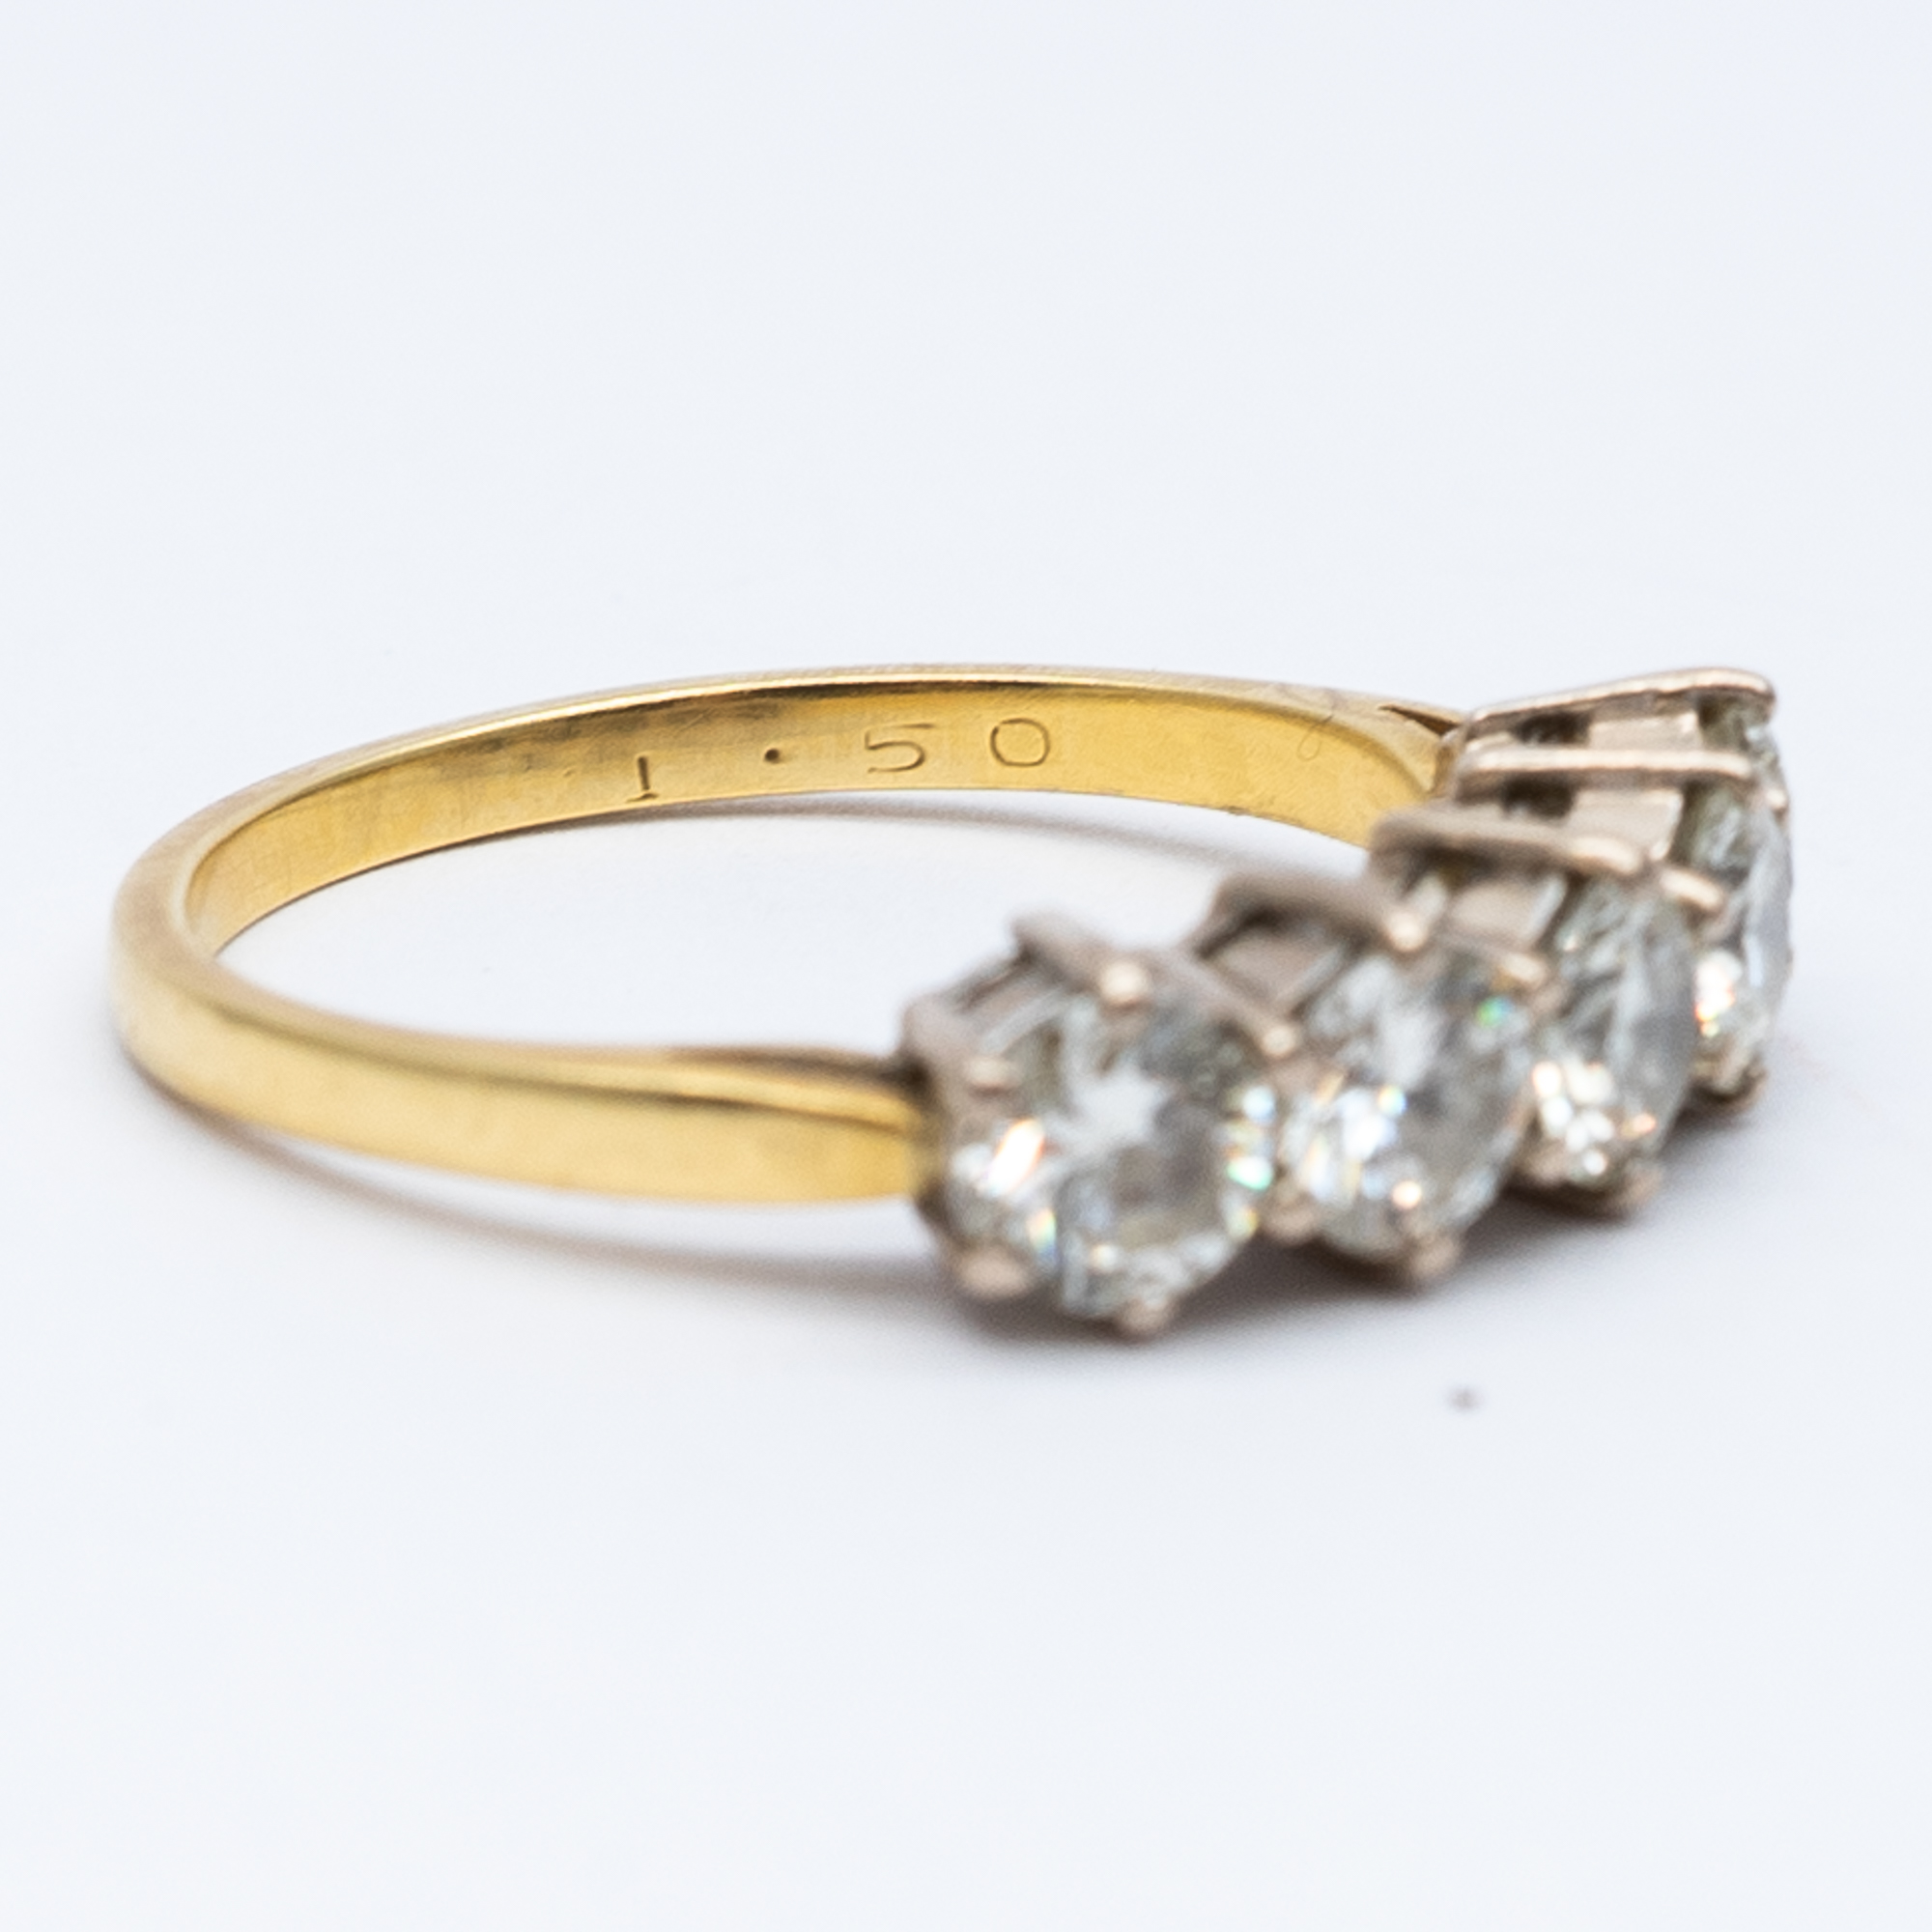 An 18ct yellow gold 5 stone diamond eternity ring - Image 7 of 7